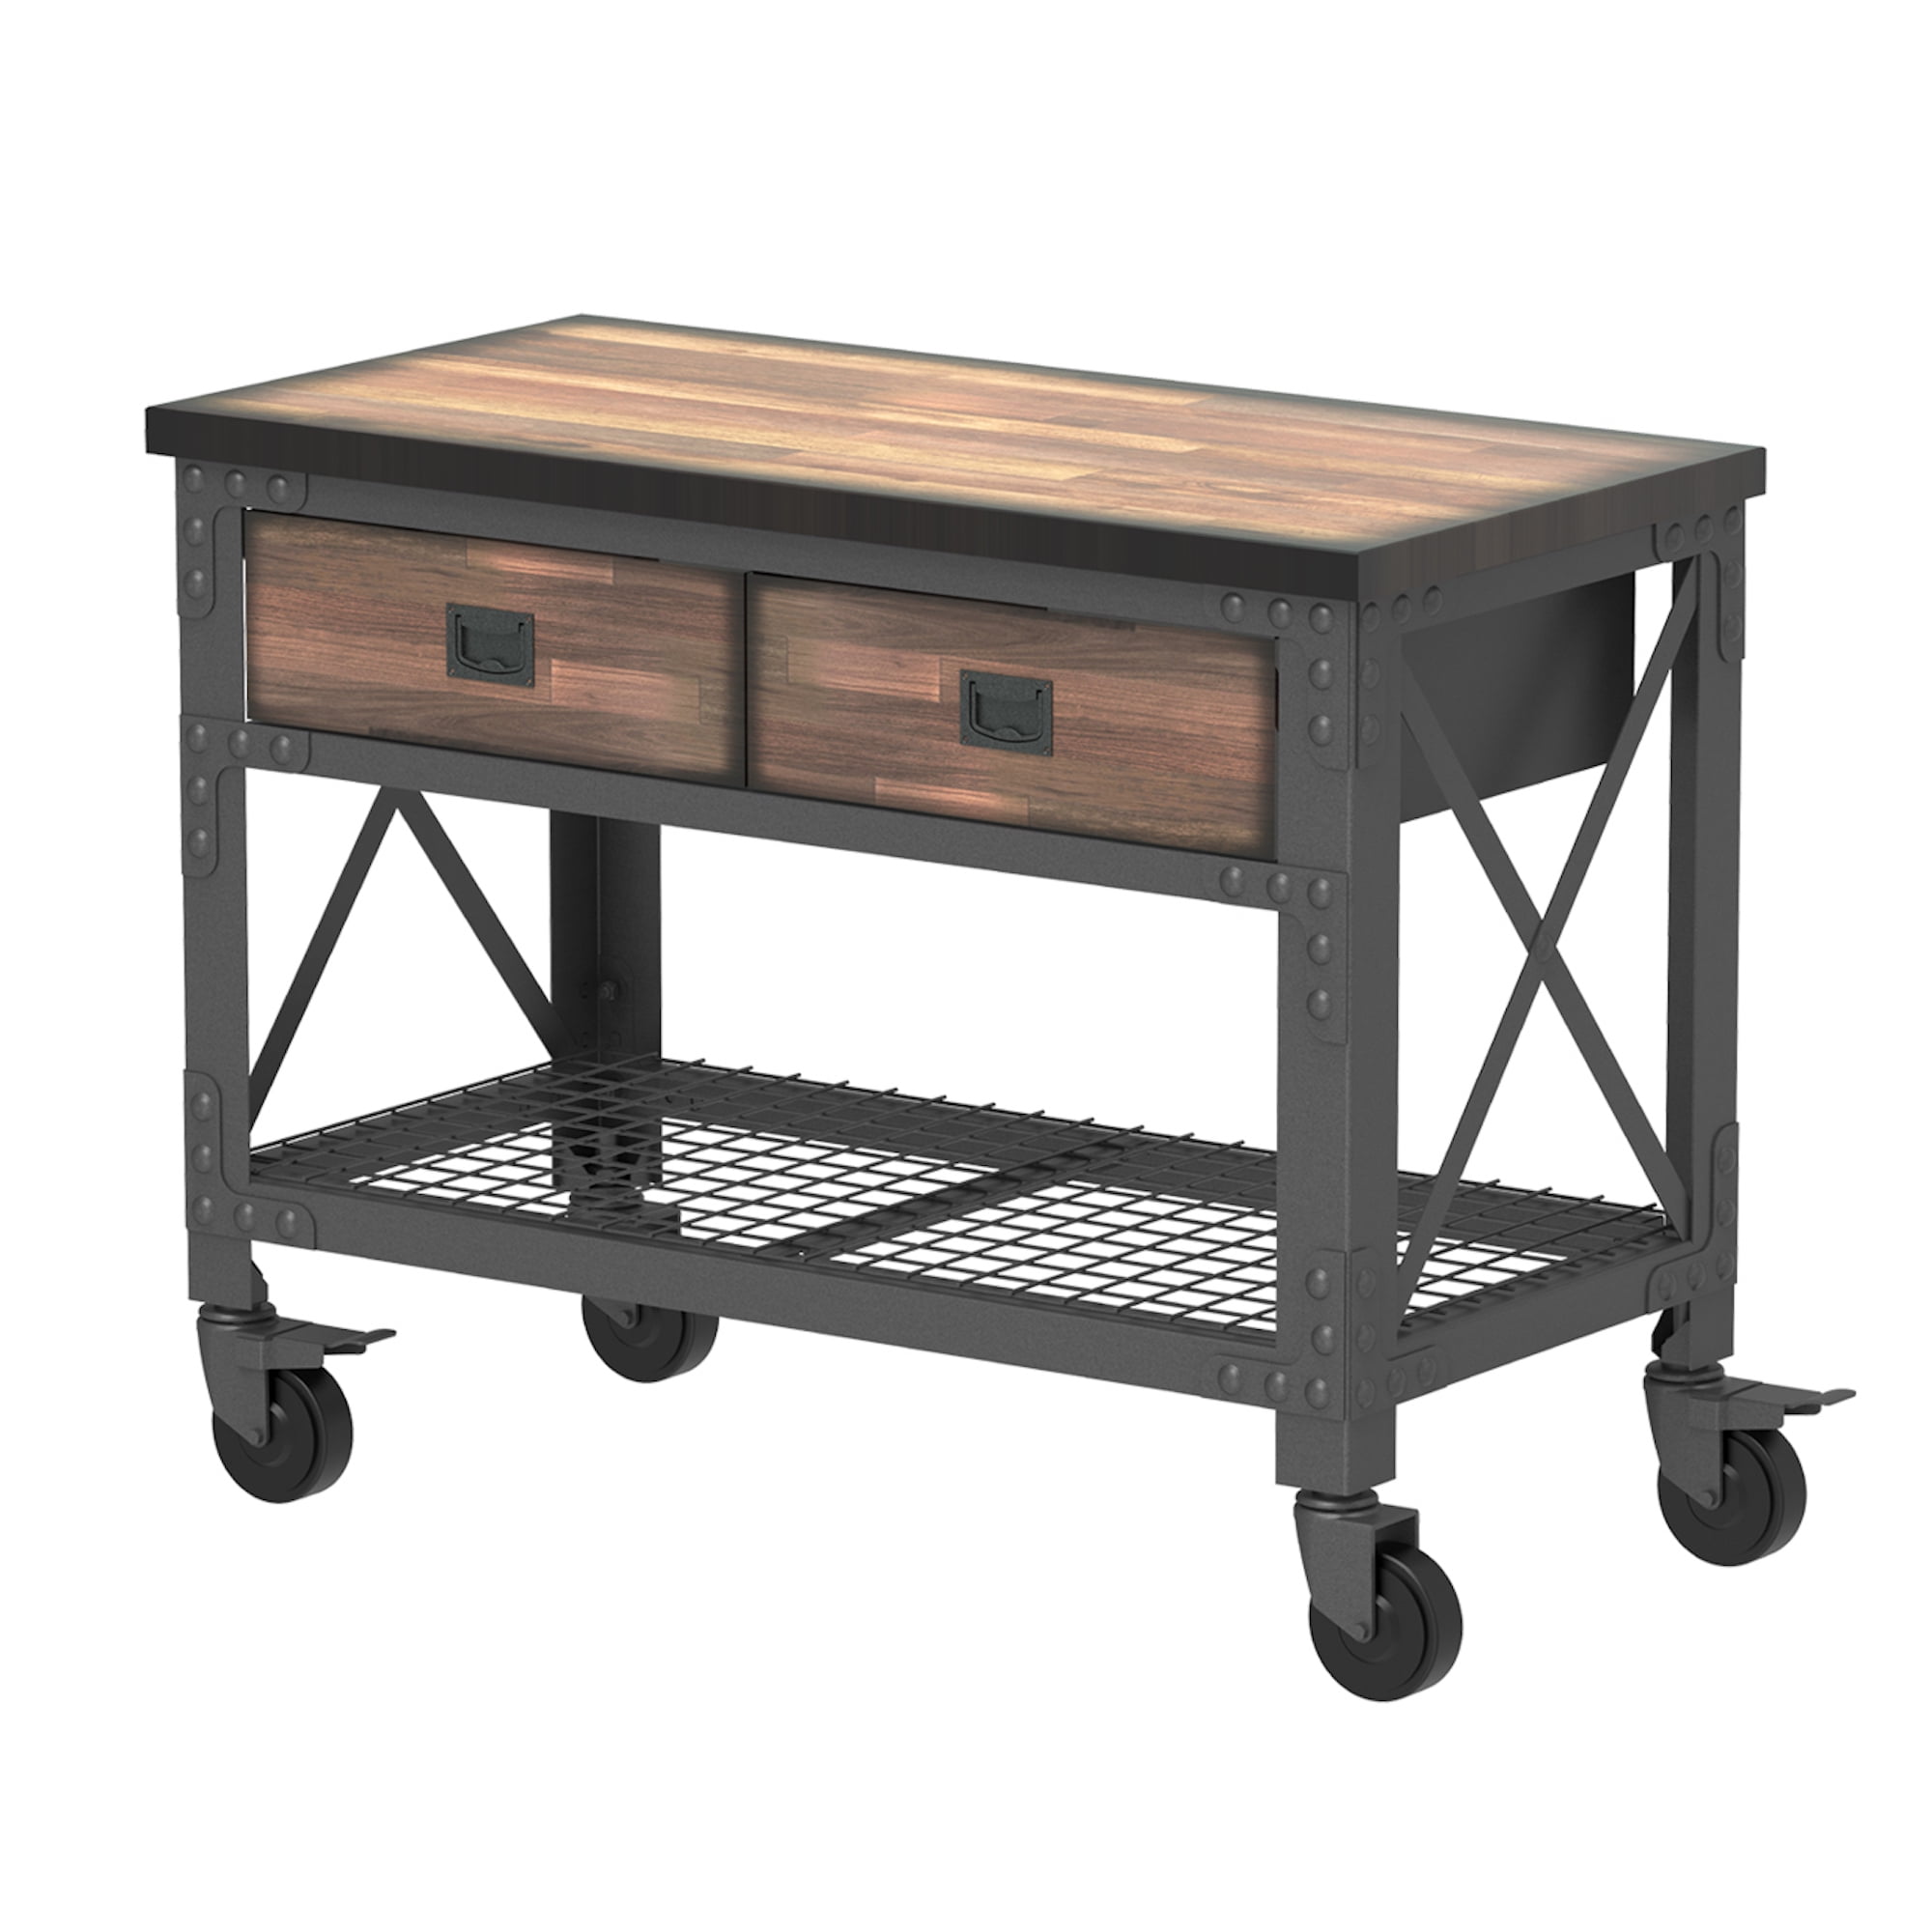 Rolling wood workbench anydesk slow performance